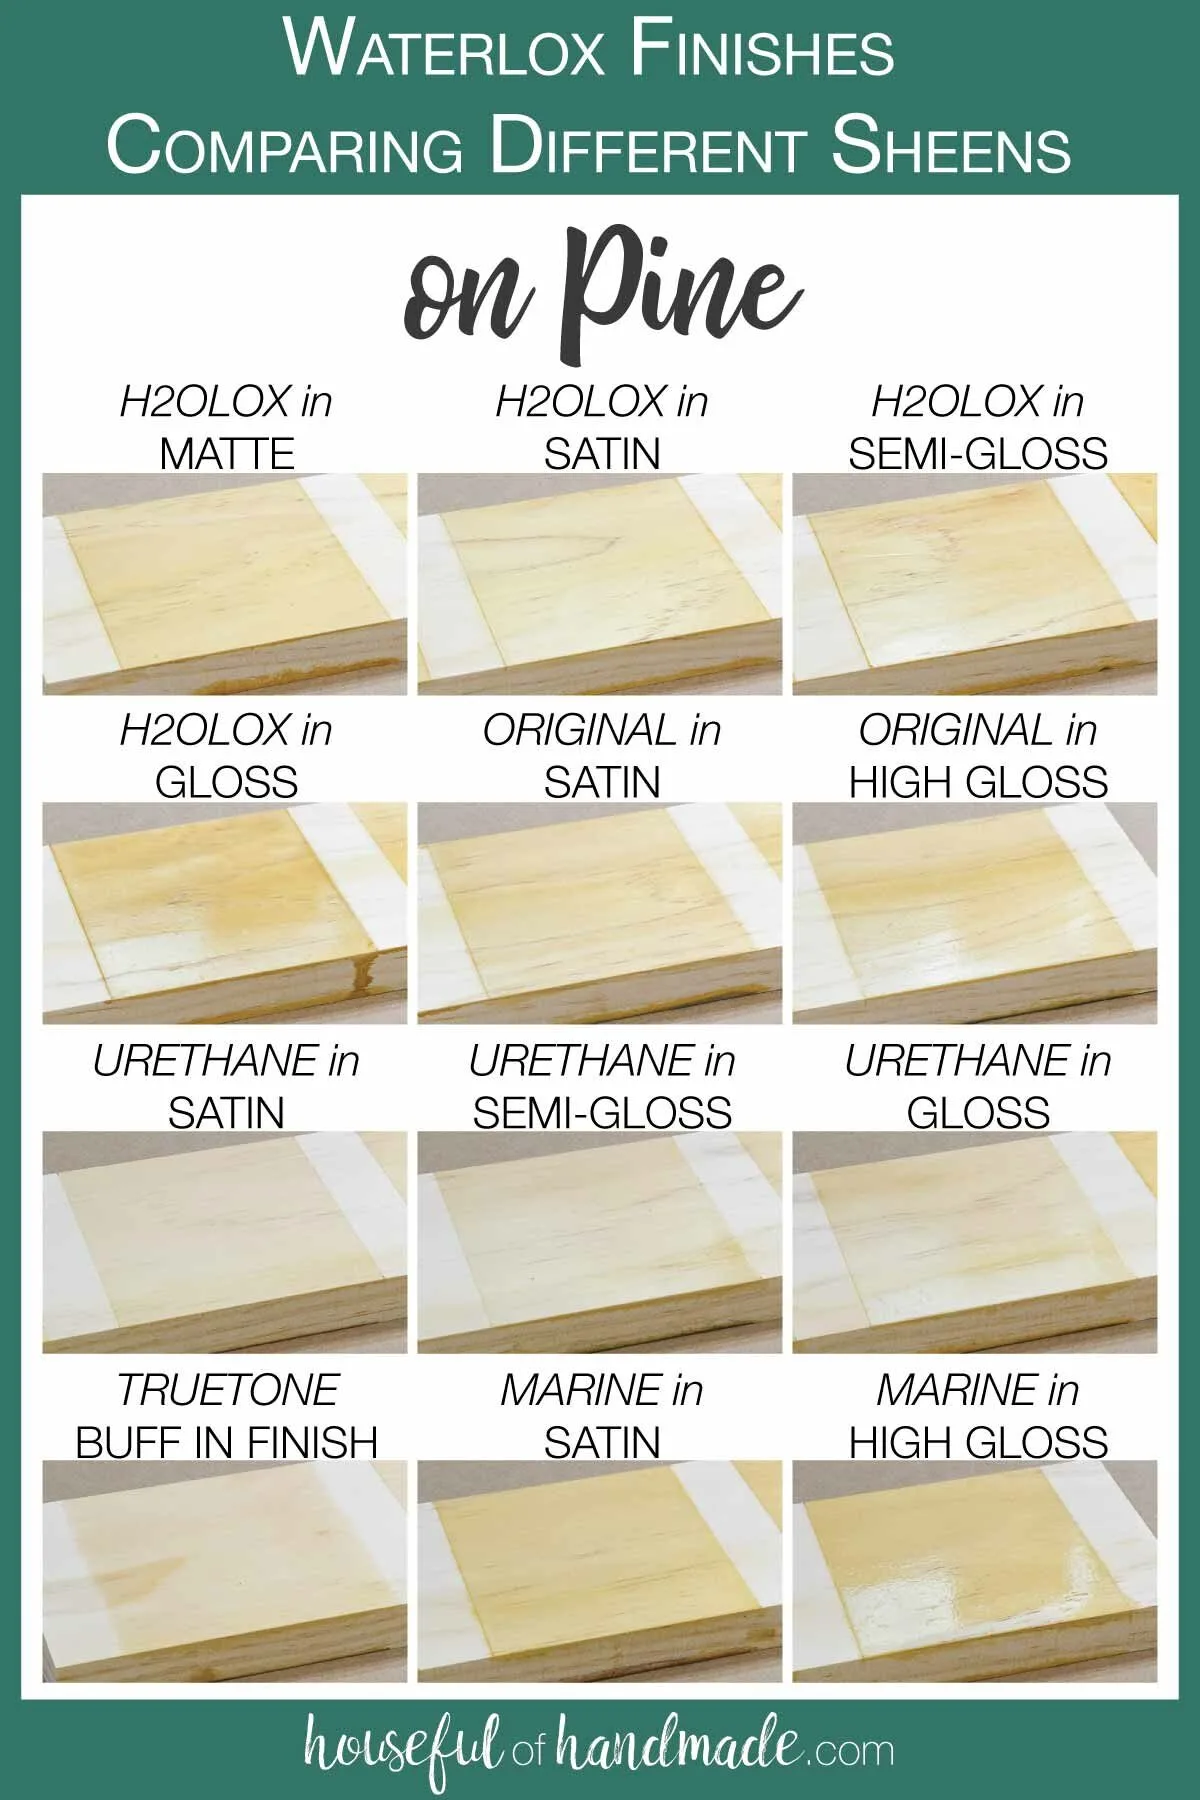 12 samples of the different sheens of all the Waterlox finishes on Pineboards.